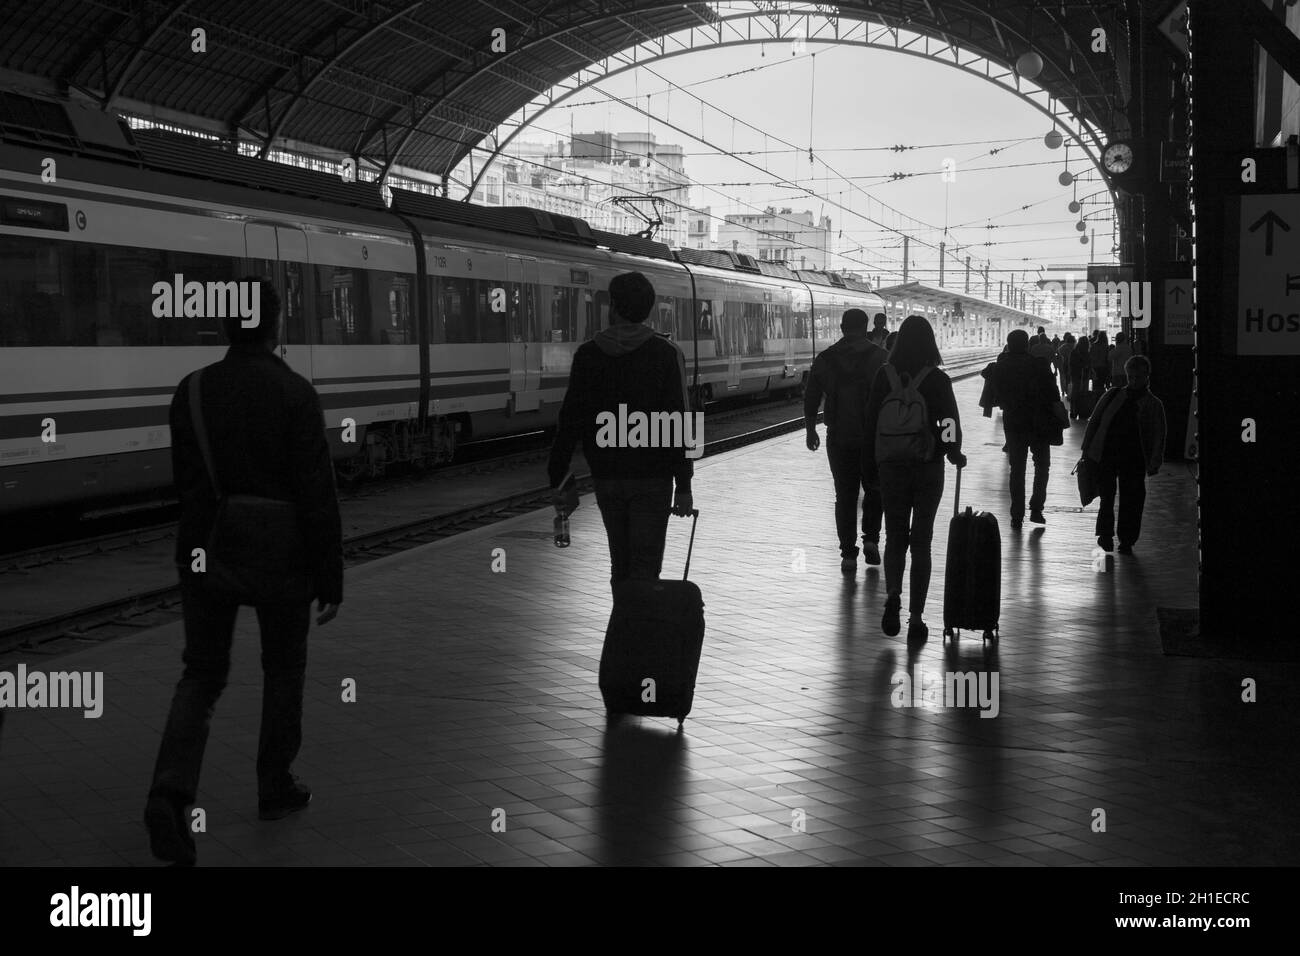 Valencia, Spain - 04, 05, 2018: People walking on the platforms of the Valencia train station with a train stopped in the background Stock Photo